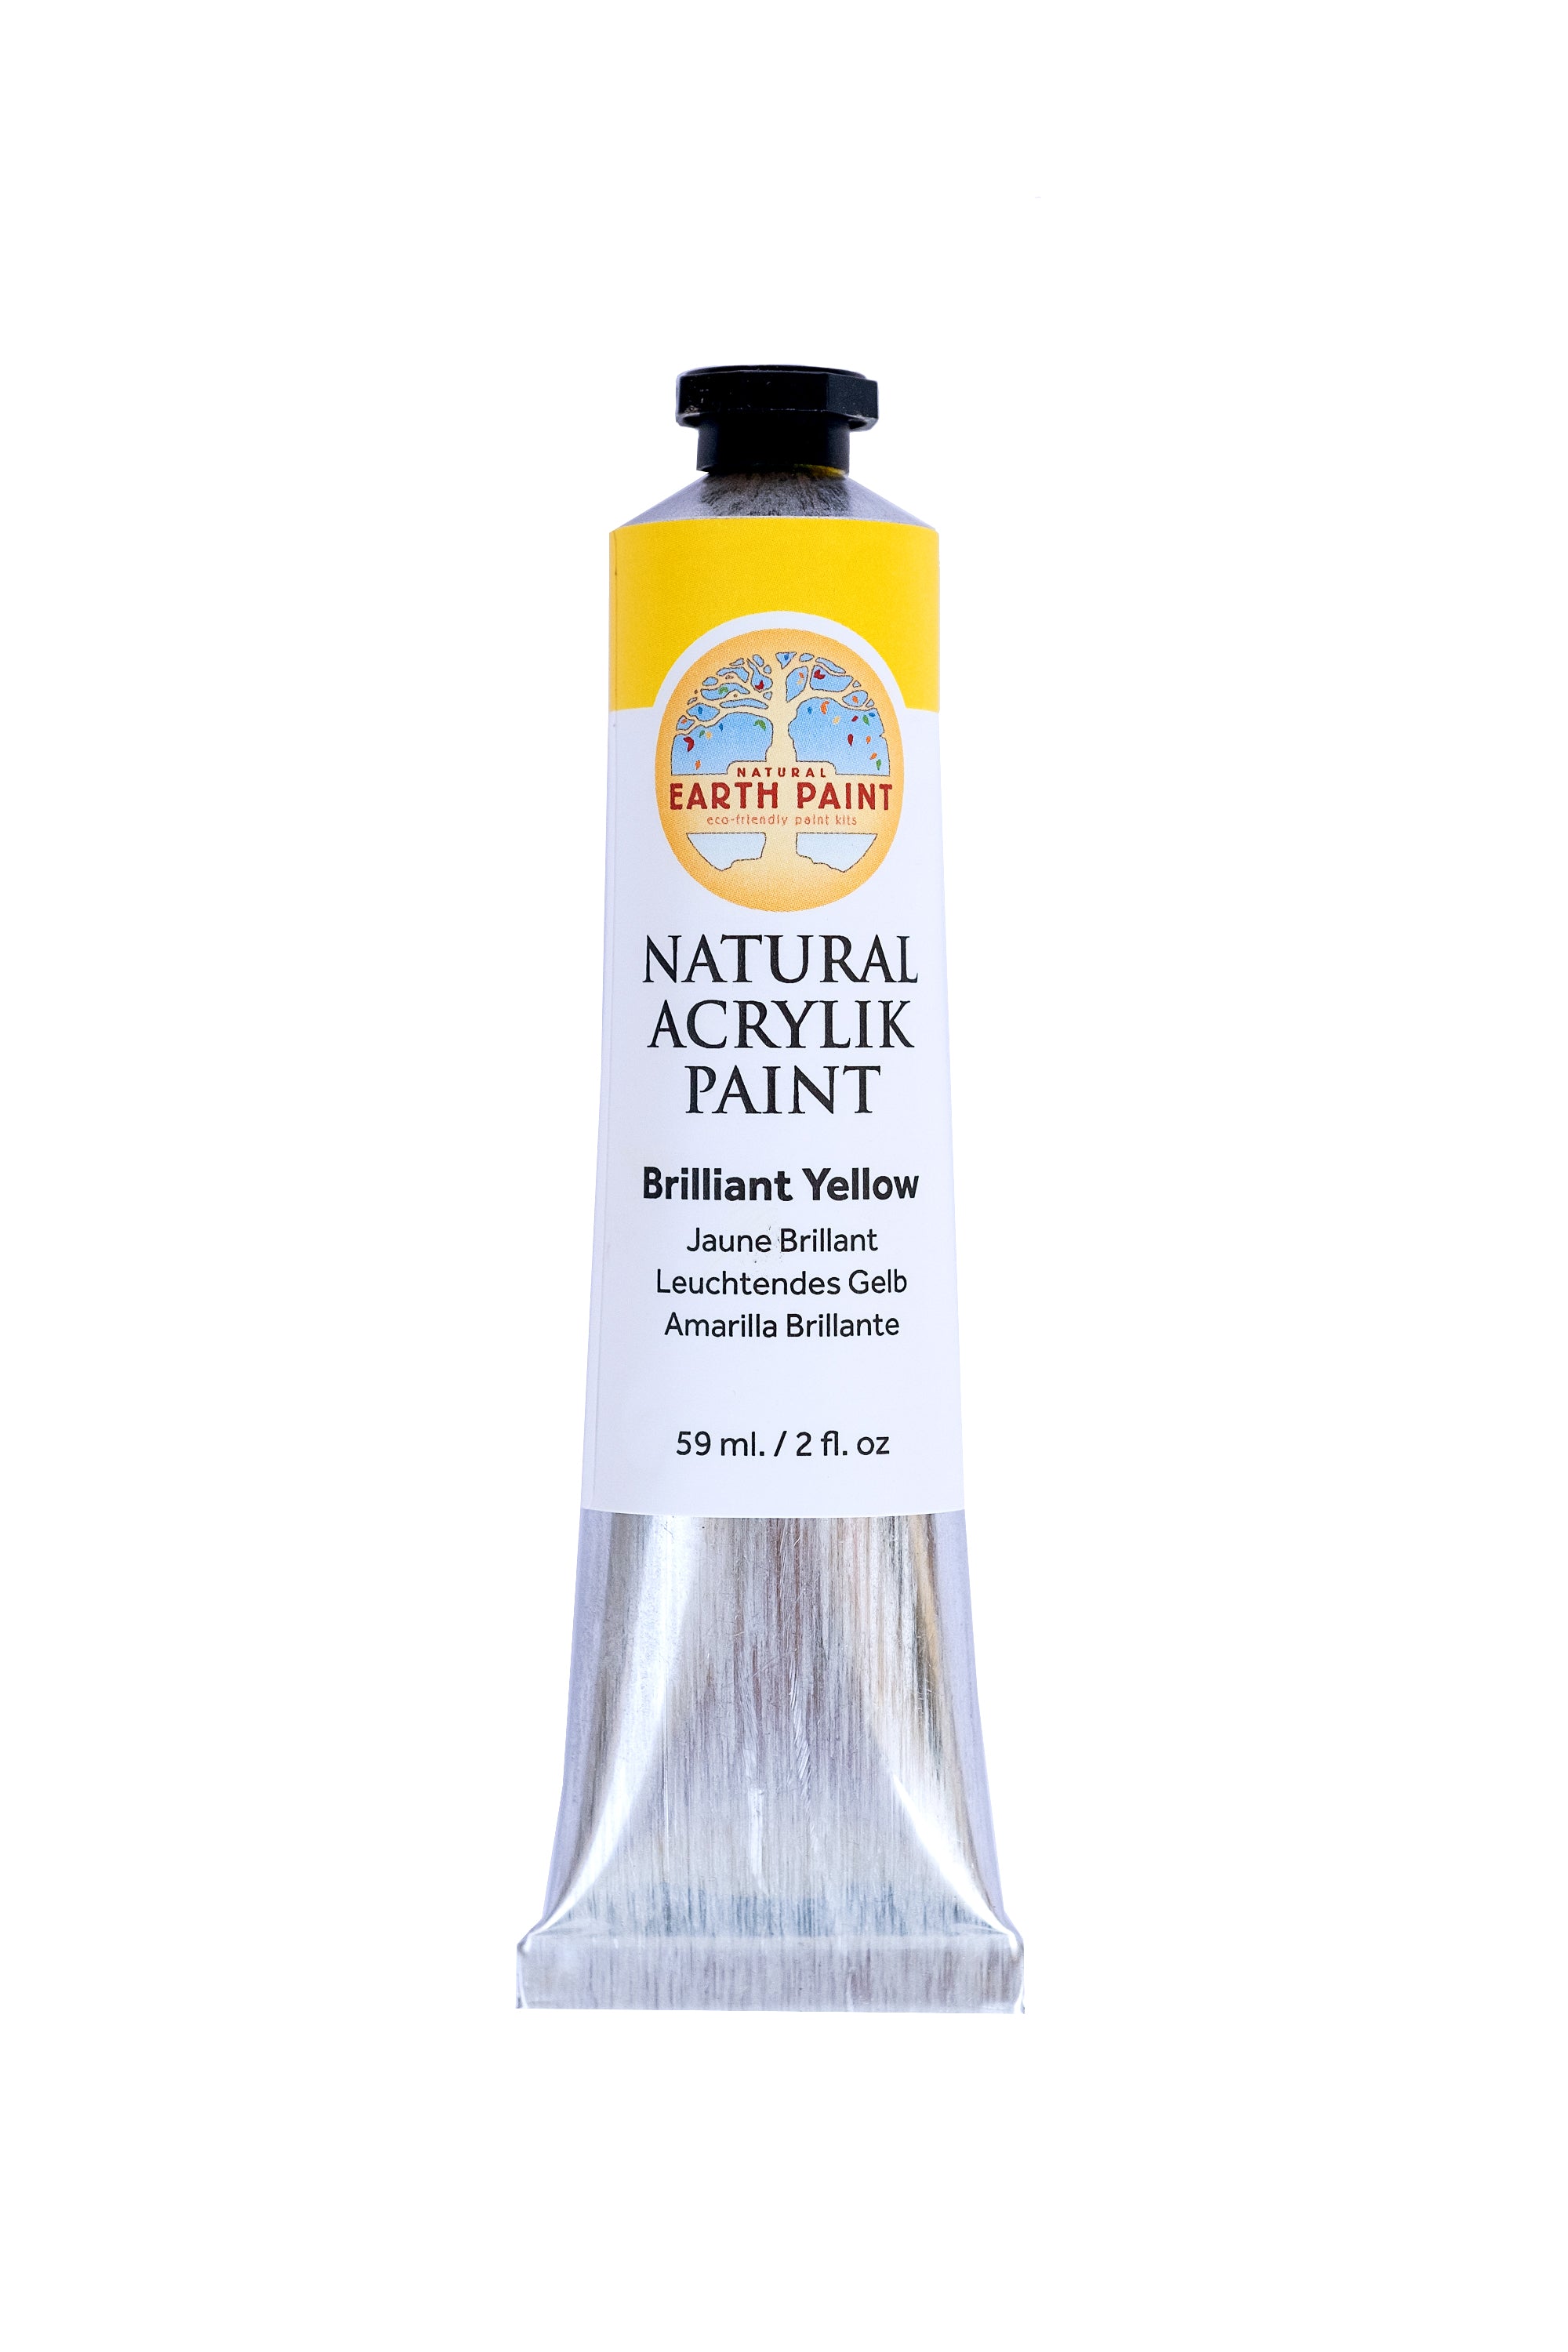 Natural Acrylik Paint™ - Individual Tubes-acrylic, acrylic paint, art, arts and craft, colors from the earth, earth colors, earth paint, earth pigments, eco art supplies, Eco Artist Paints, eco friendly paints, eco-friendly art supplies, eco-friendly paint, Fine Art Supplies Products, natural acrylic, natural artist paints, natural earth colors, natural paint, natural paints, non-toxic paint, nontoxic artist paints, nontoxic artist supplies, nontoxic paints, paint, sustainable art supplies-Brilliant Yellow-